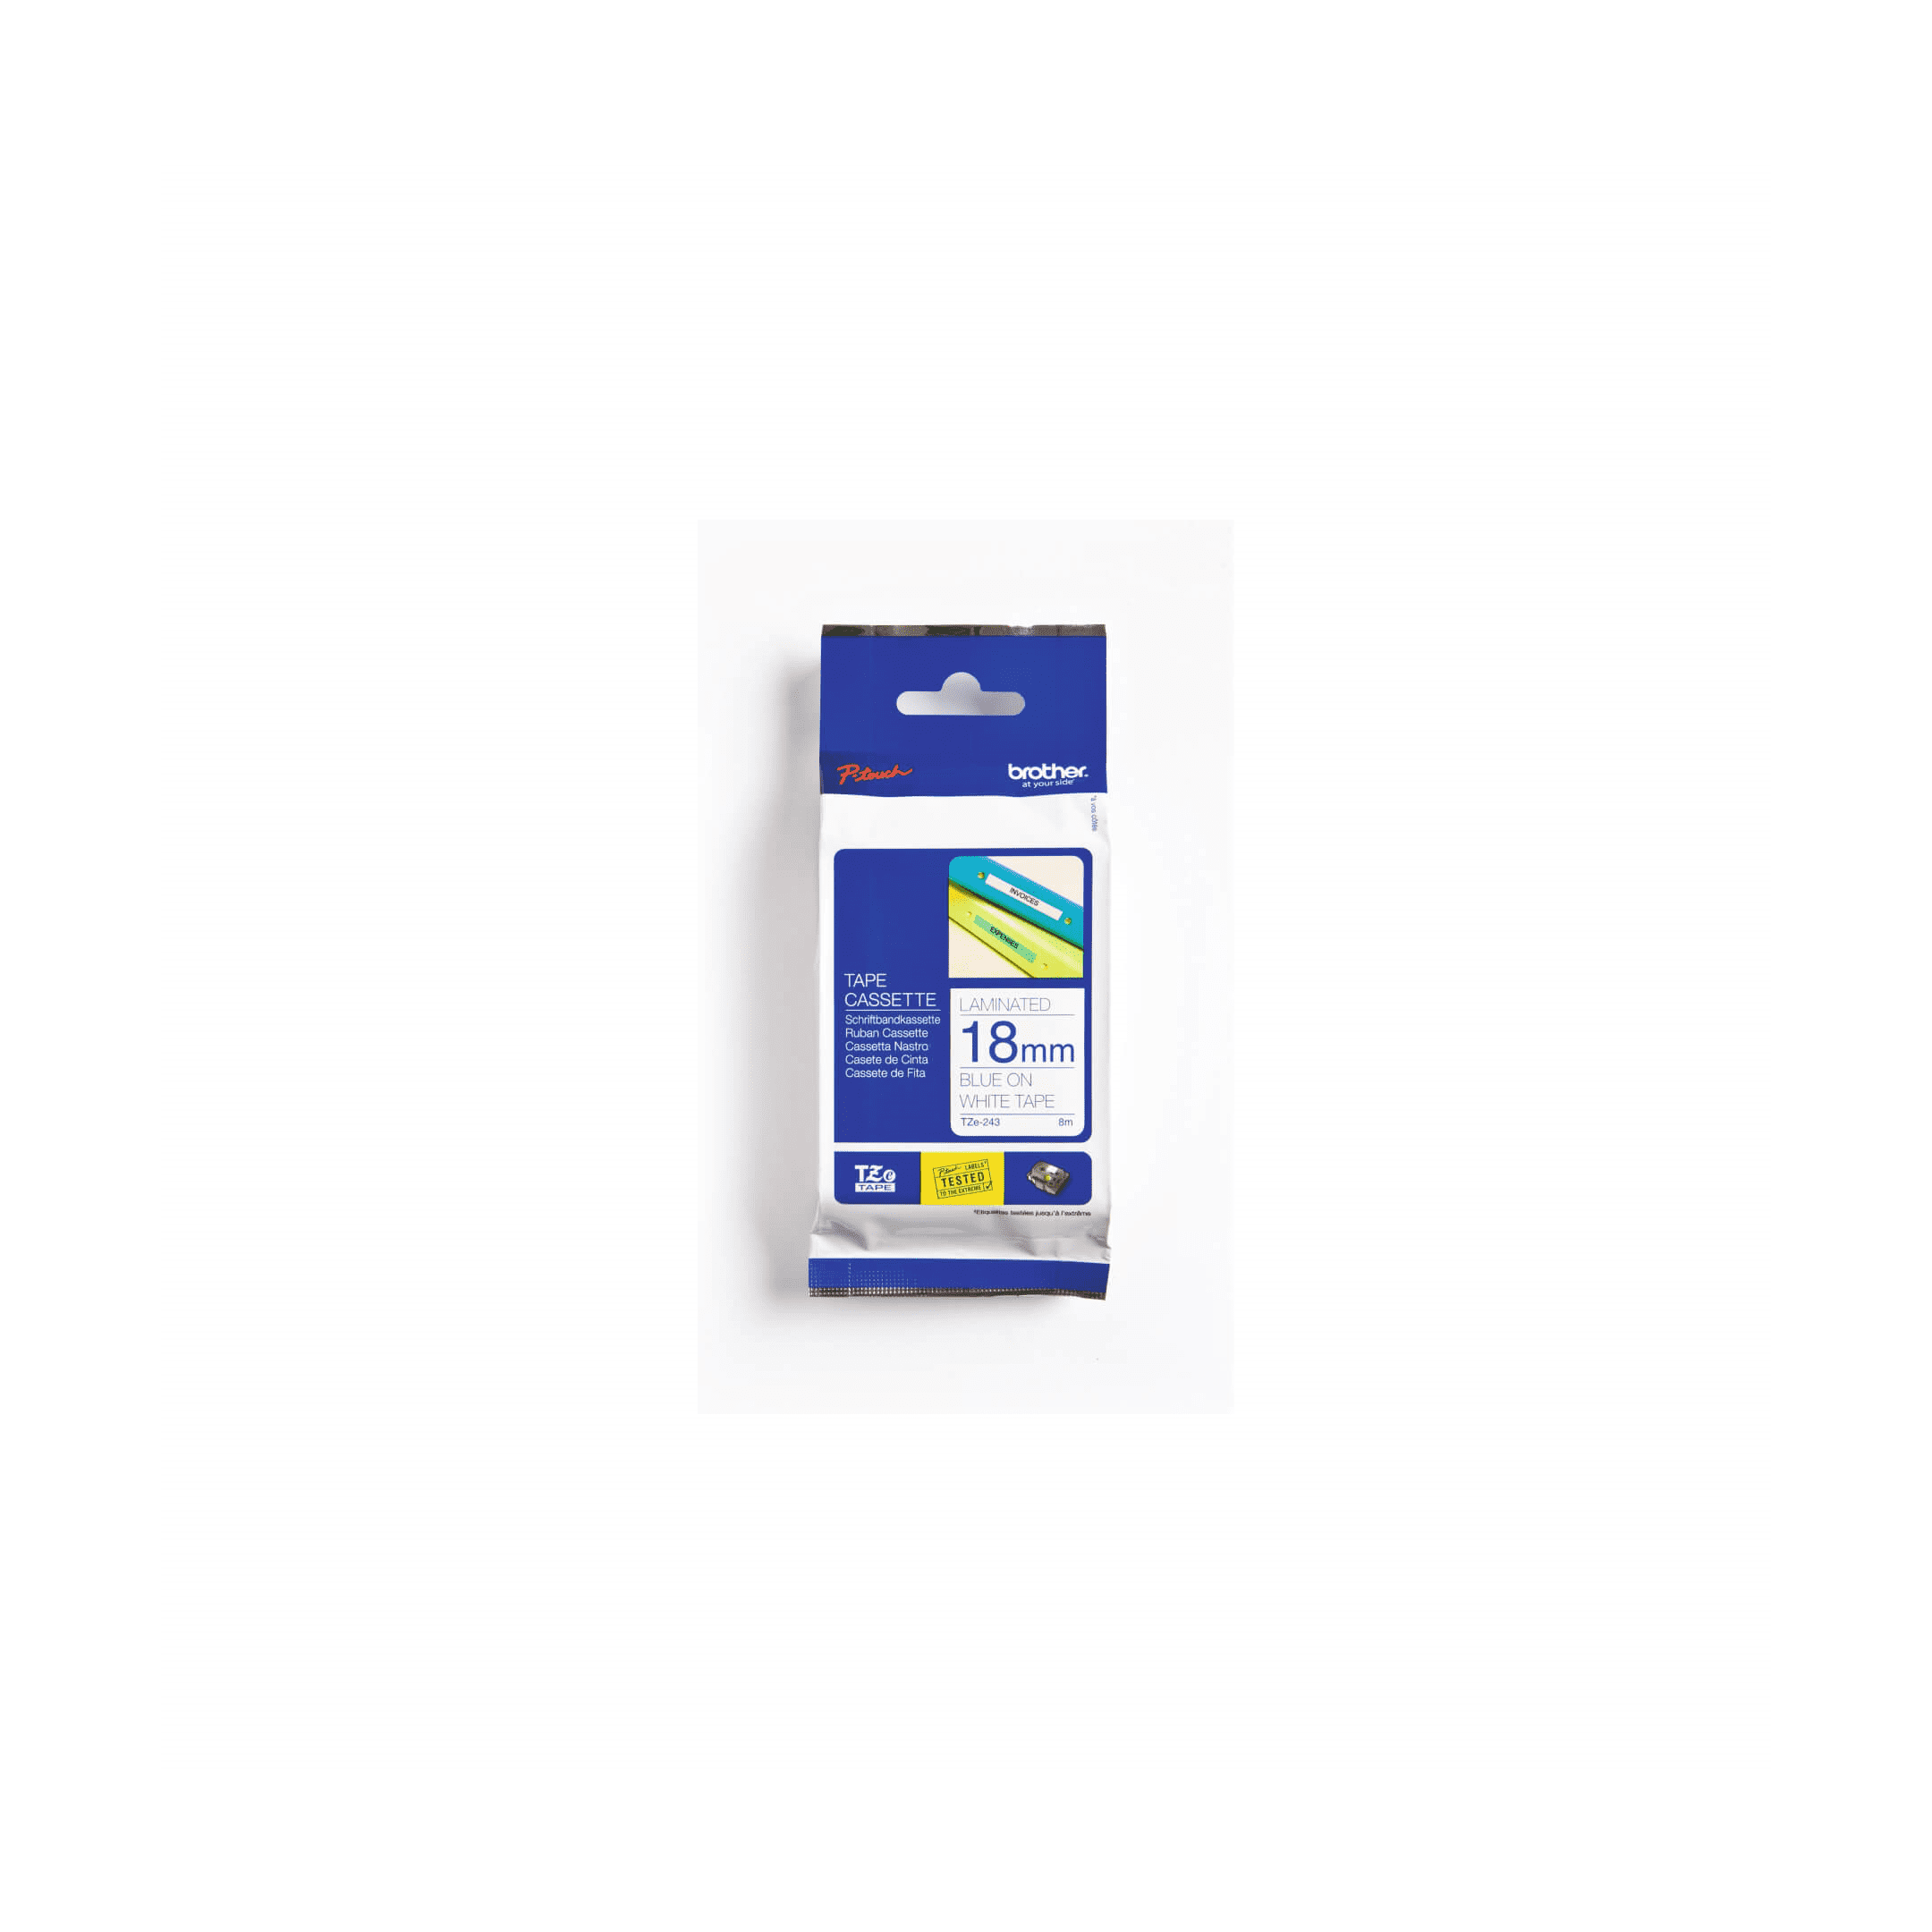 Brother Genuine TZe243 Blue on White Laminated Tape for P-touch Label Makers, 18 mm wide x 8 m long